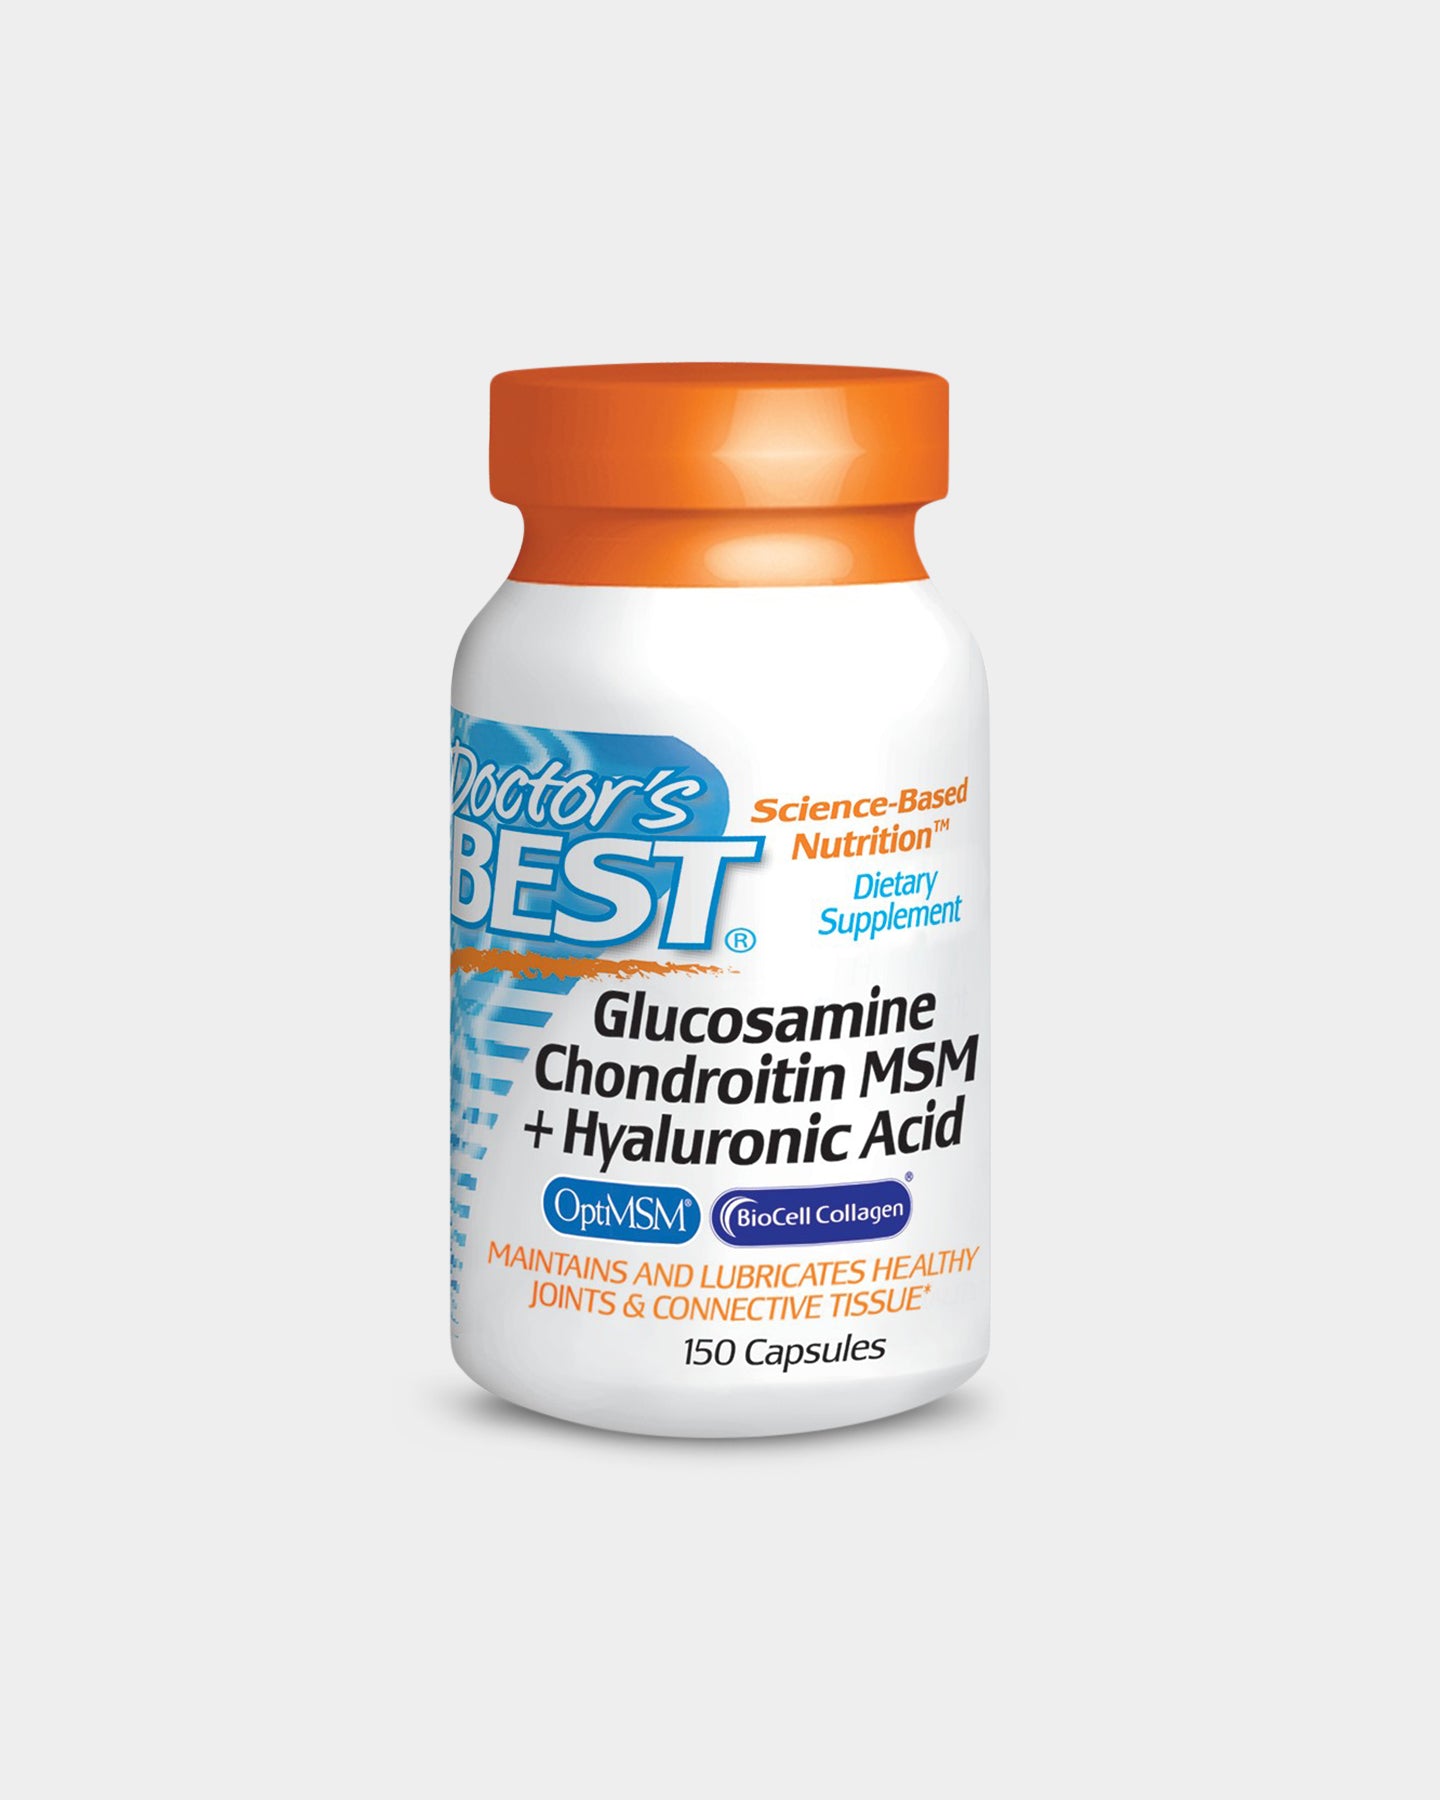 Image of Doctor's Best Glucosamine Chondroitin MSM + Hyaluronic Acid